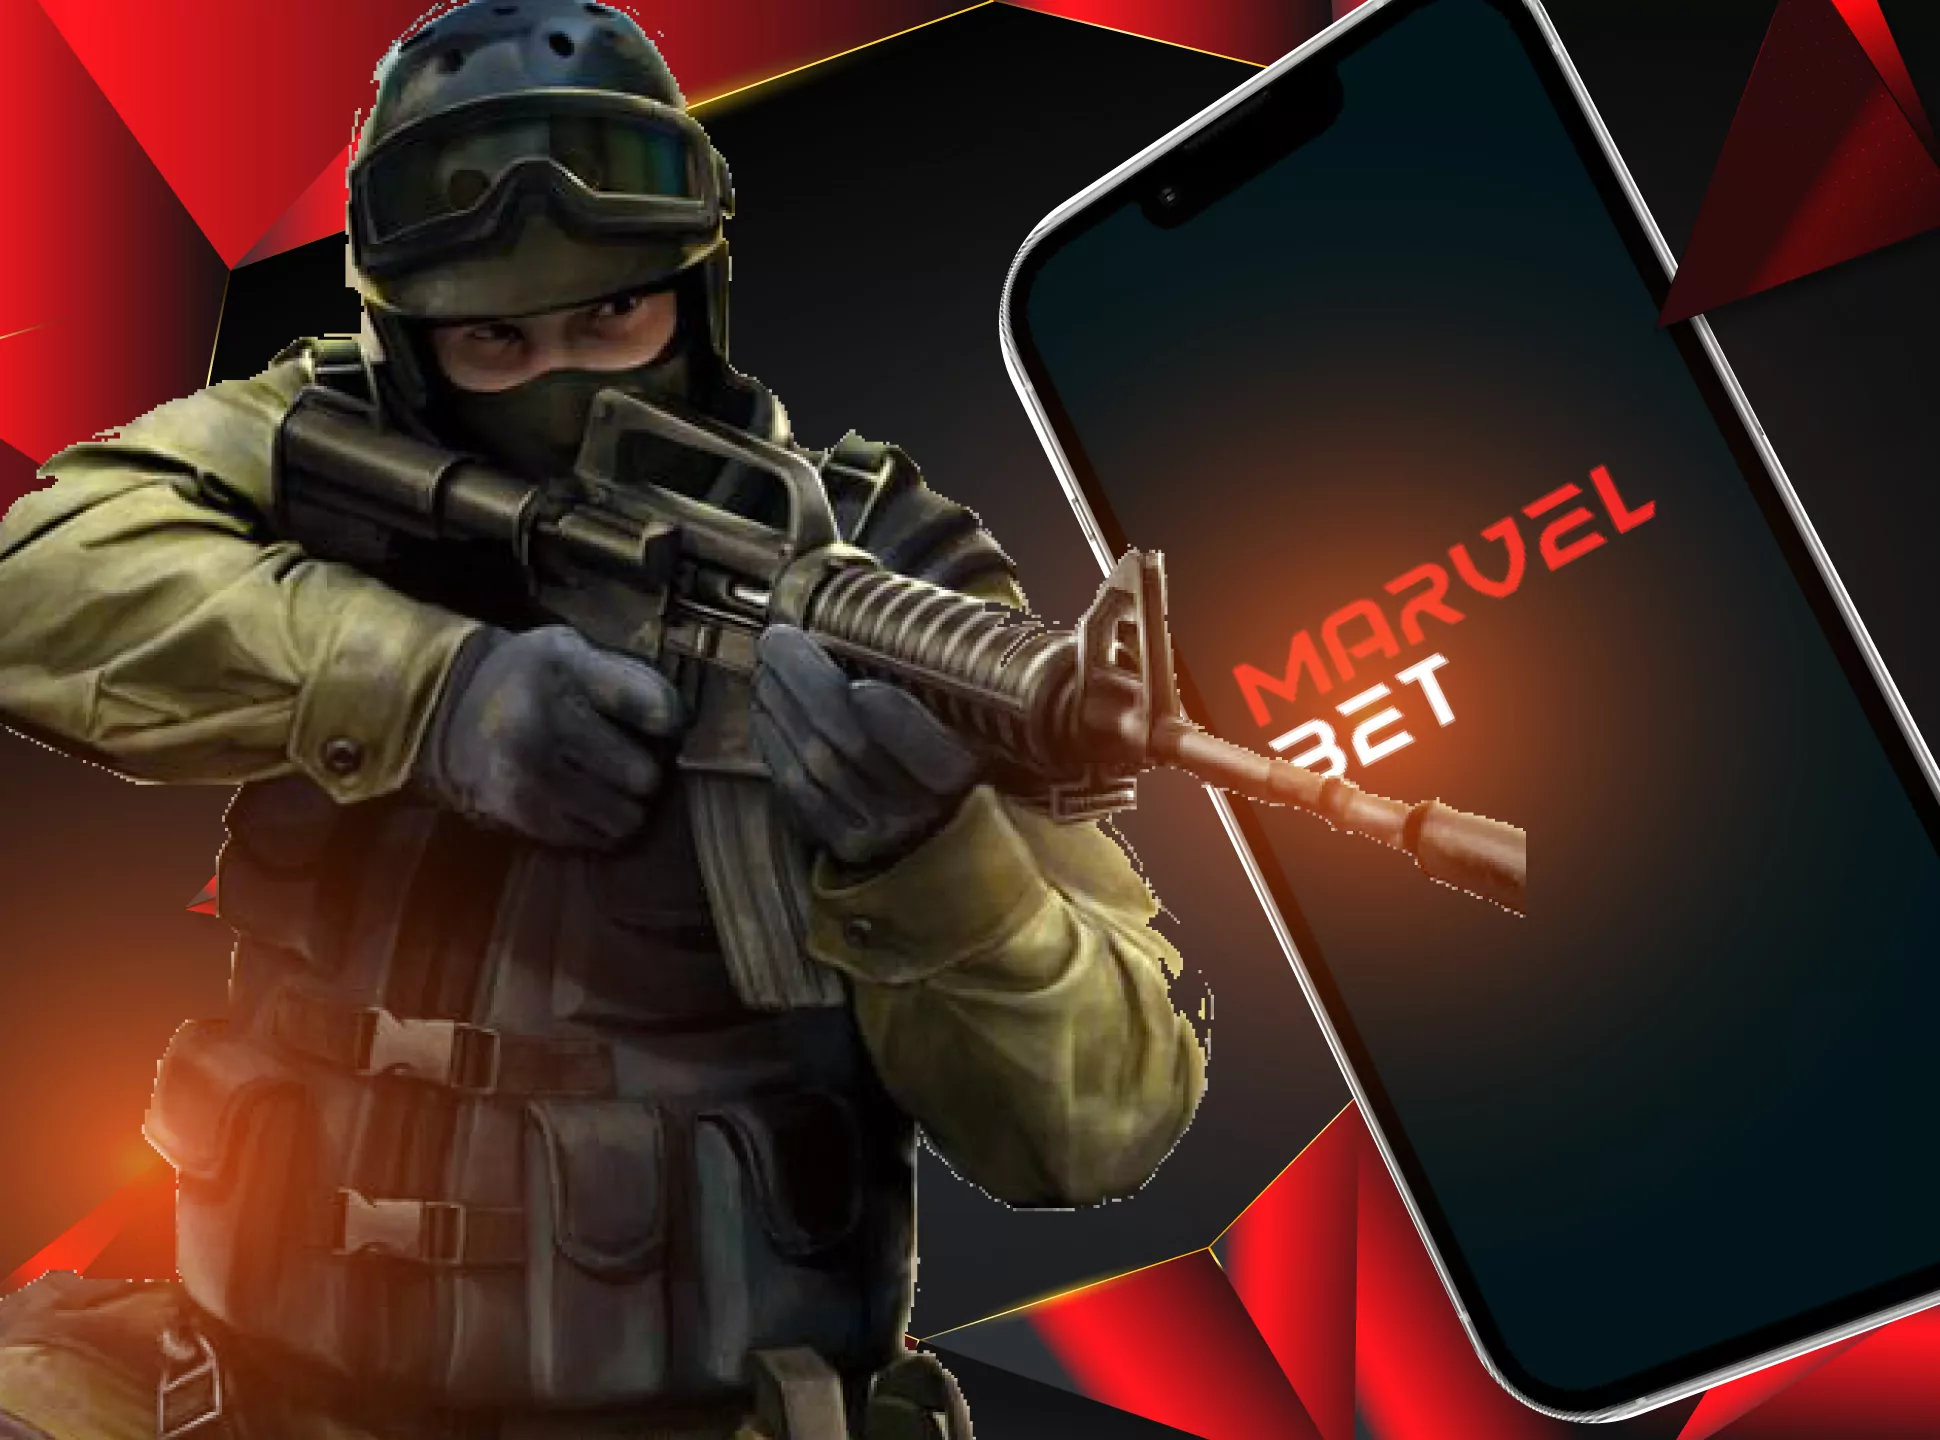 Bet on your favorite CS:GO teams in the Marvelbet app.